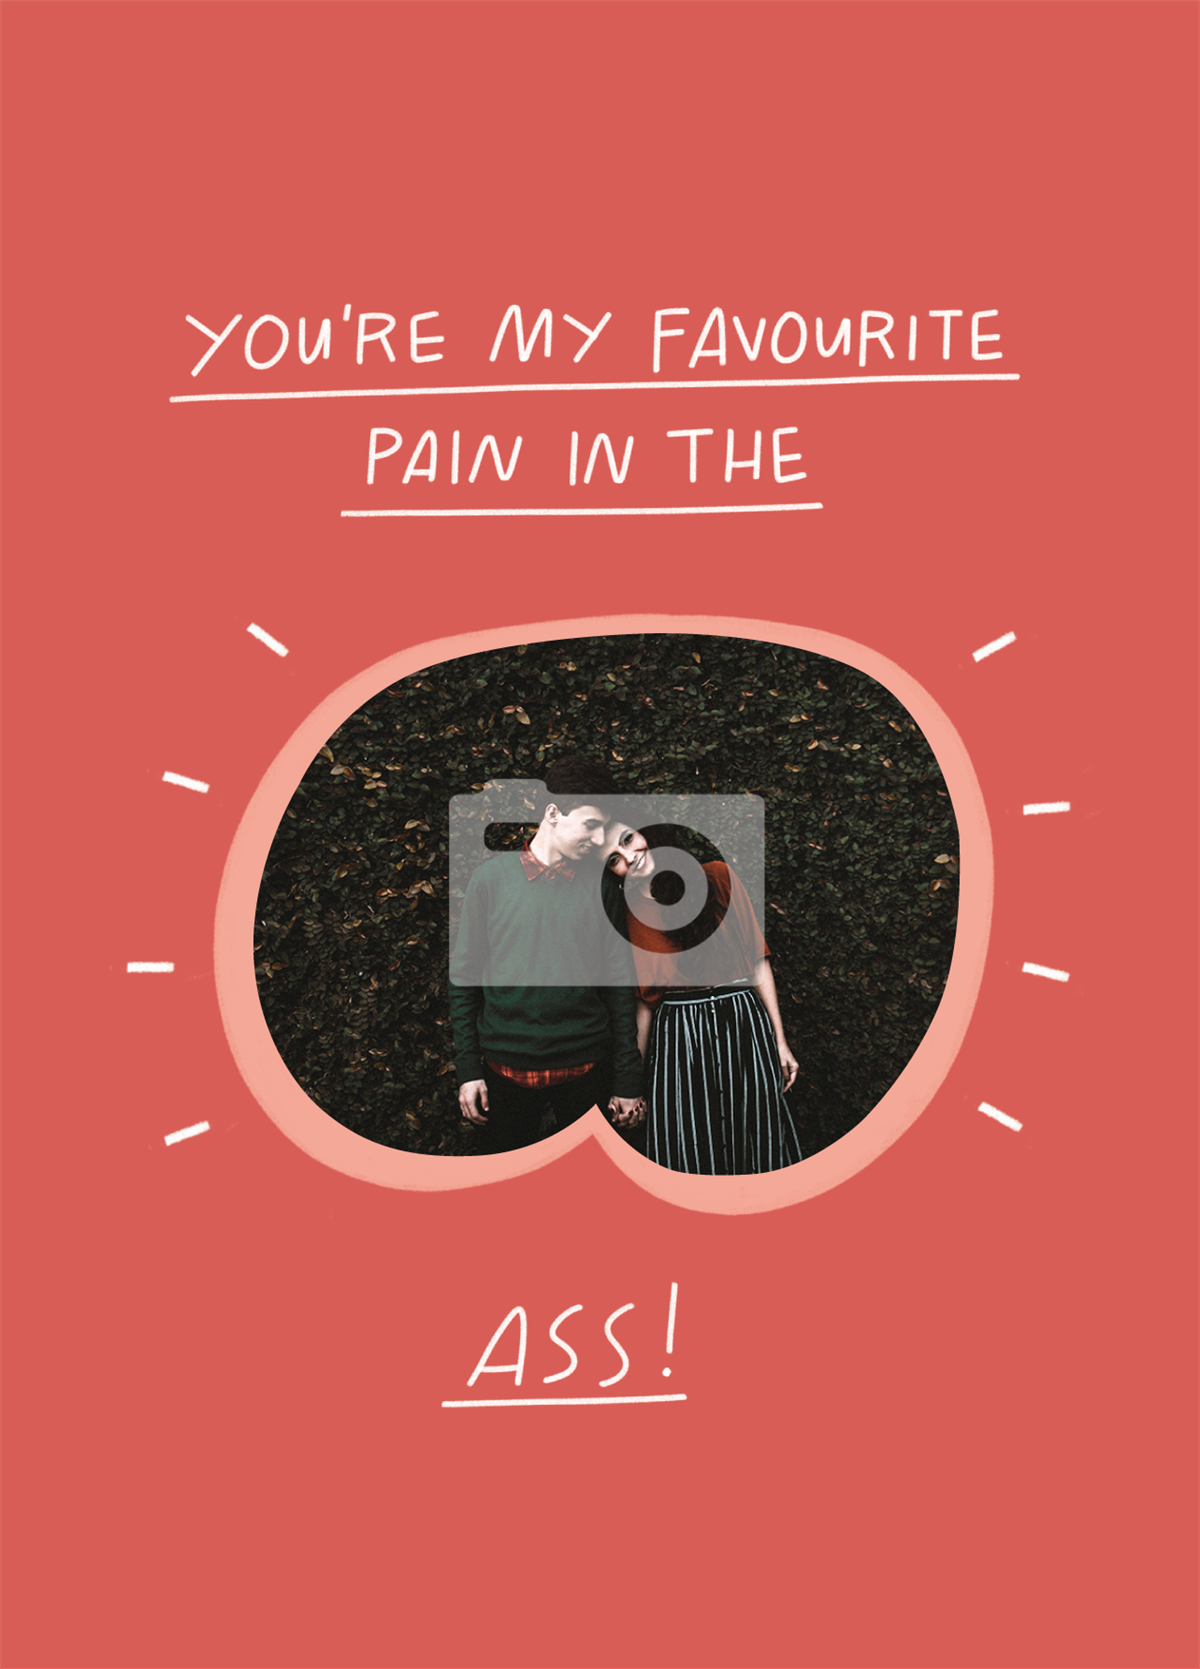 Of pain in the ass